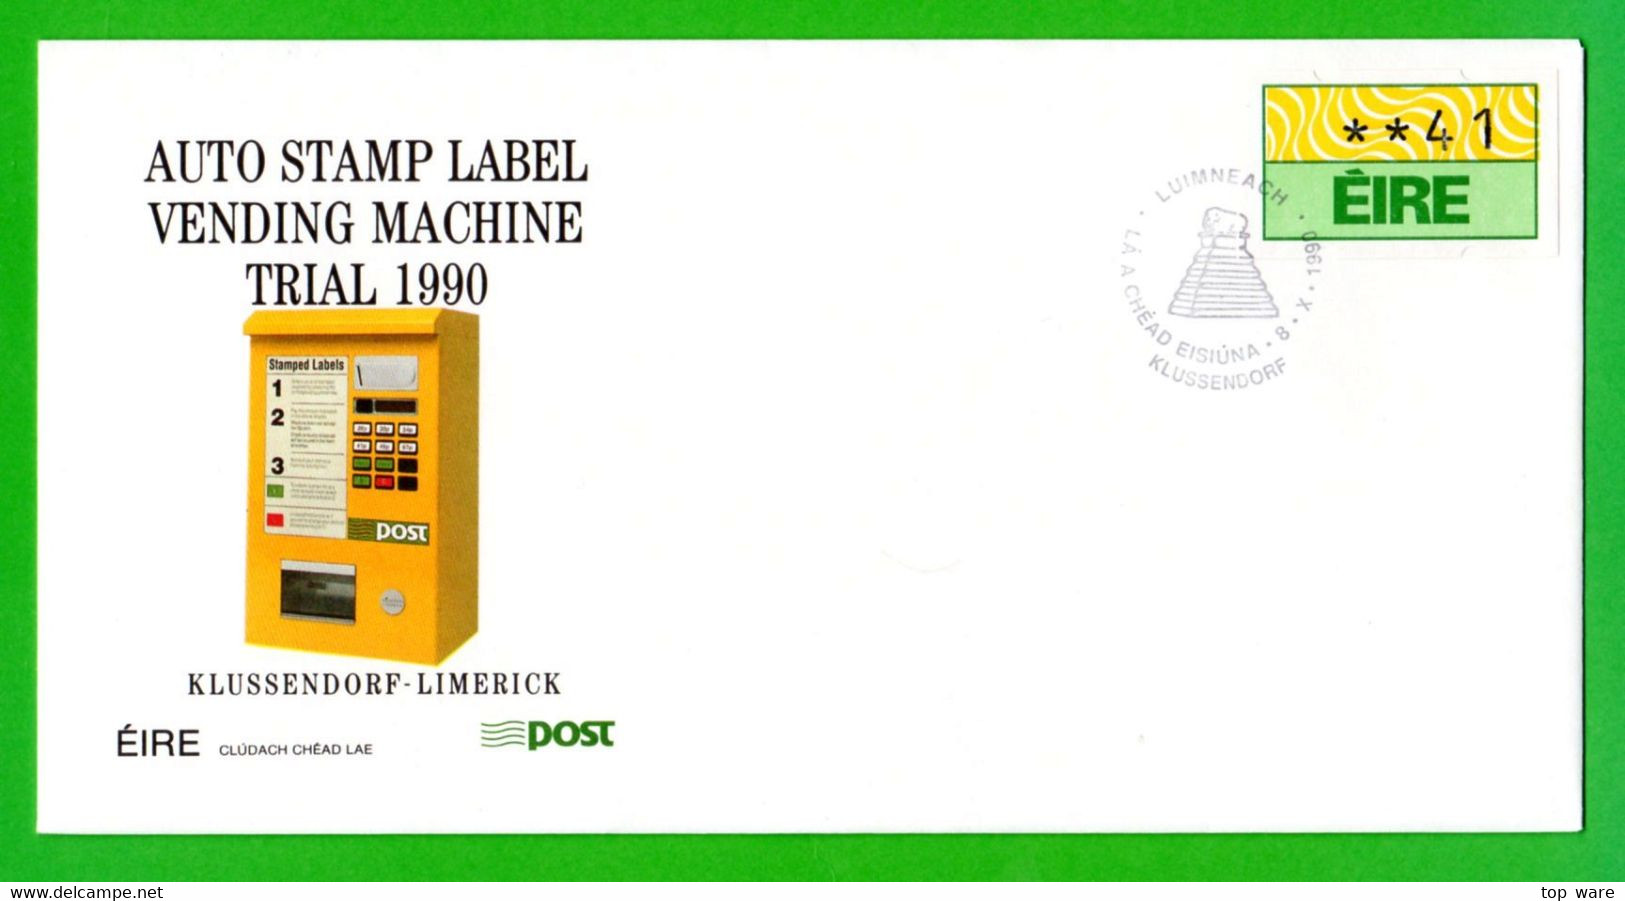 EIRE IRELAND ATM STAMPS / VENDING MACHINE TRIAL 1990 / SOAR THREE OFFICIAL FDC Automatenmarken Distributeur - Franking Labels